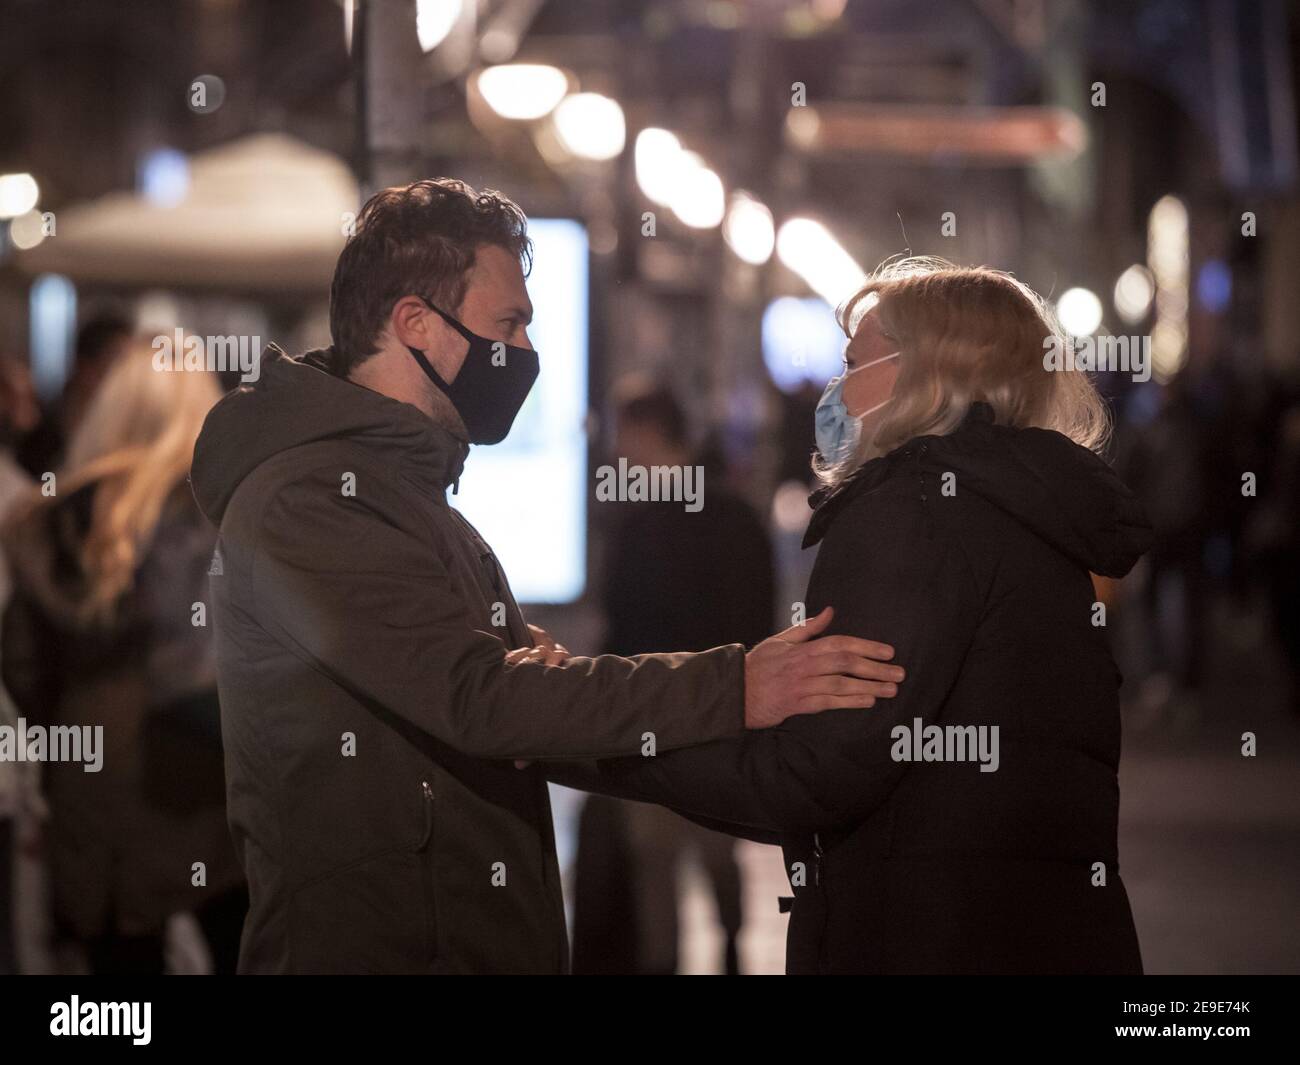 BELGRADE, SERBIA - NOVEMBER 11, 2020: Couple of lovers, man and woman hugging and showing affection wearing a face mask in Kneza Mihailova street of B Stock Photo